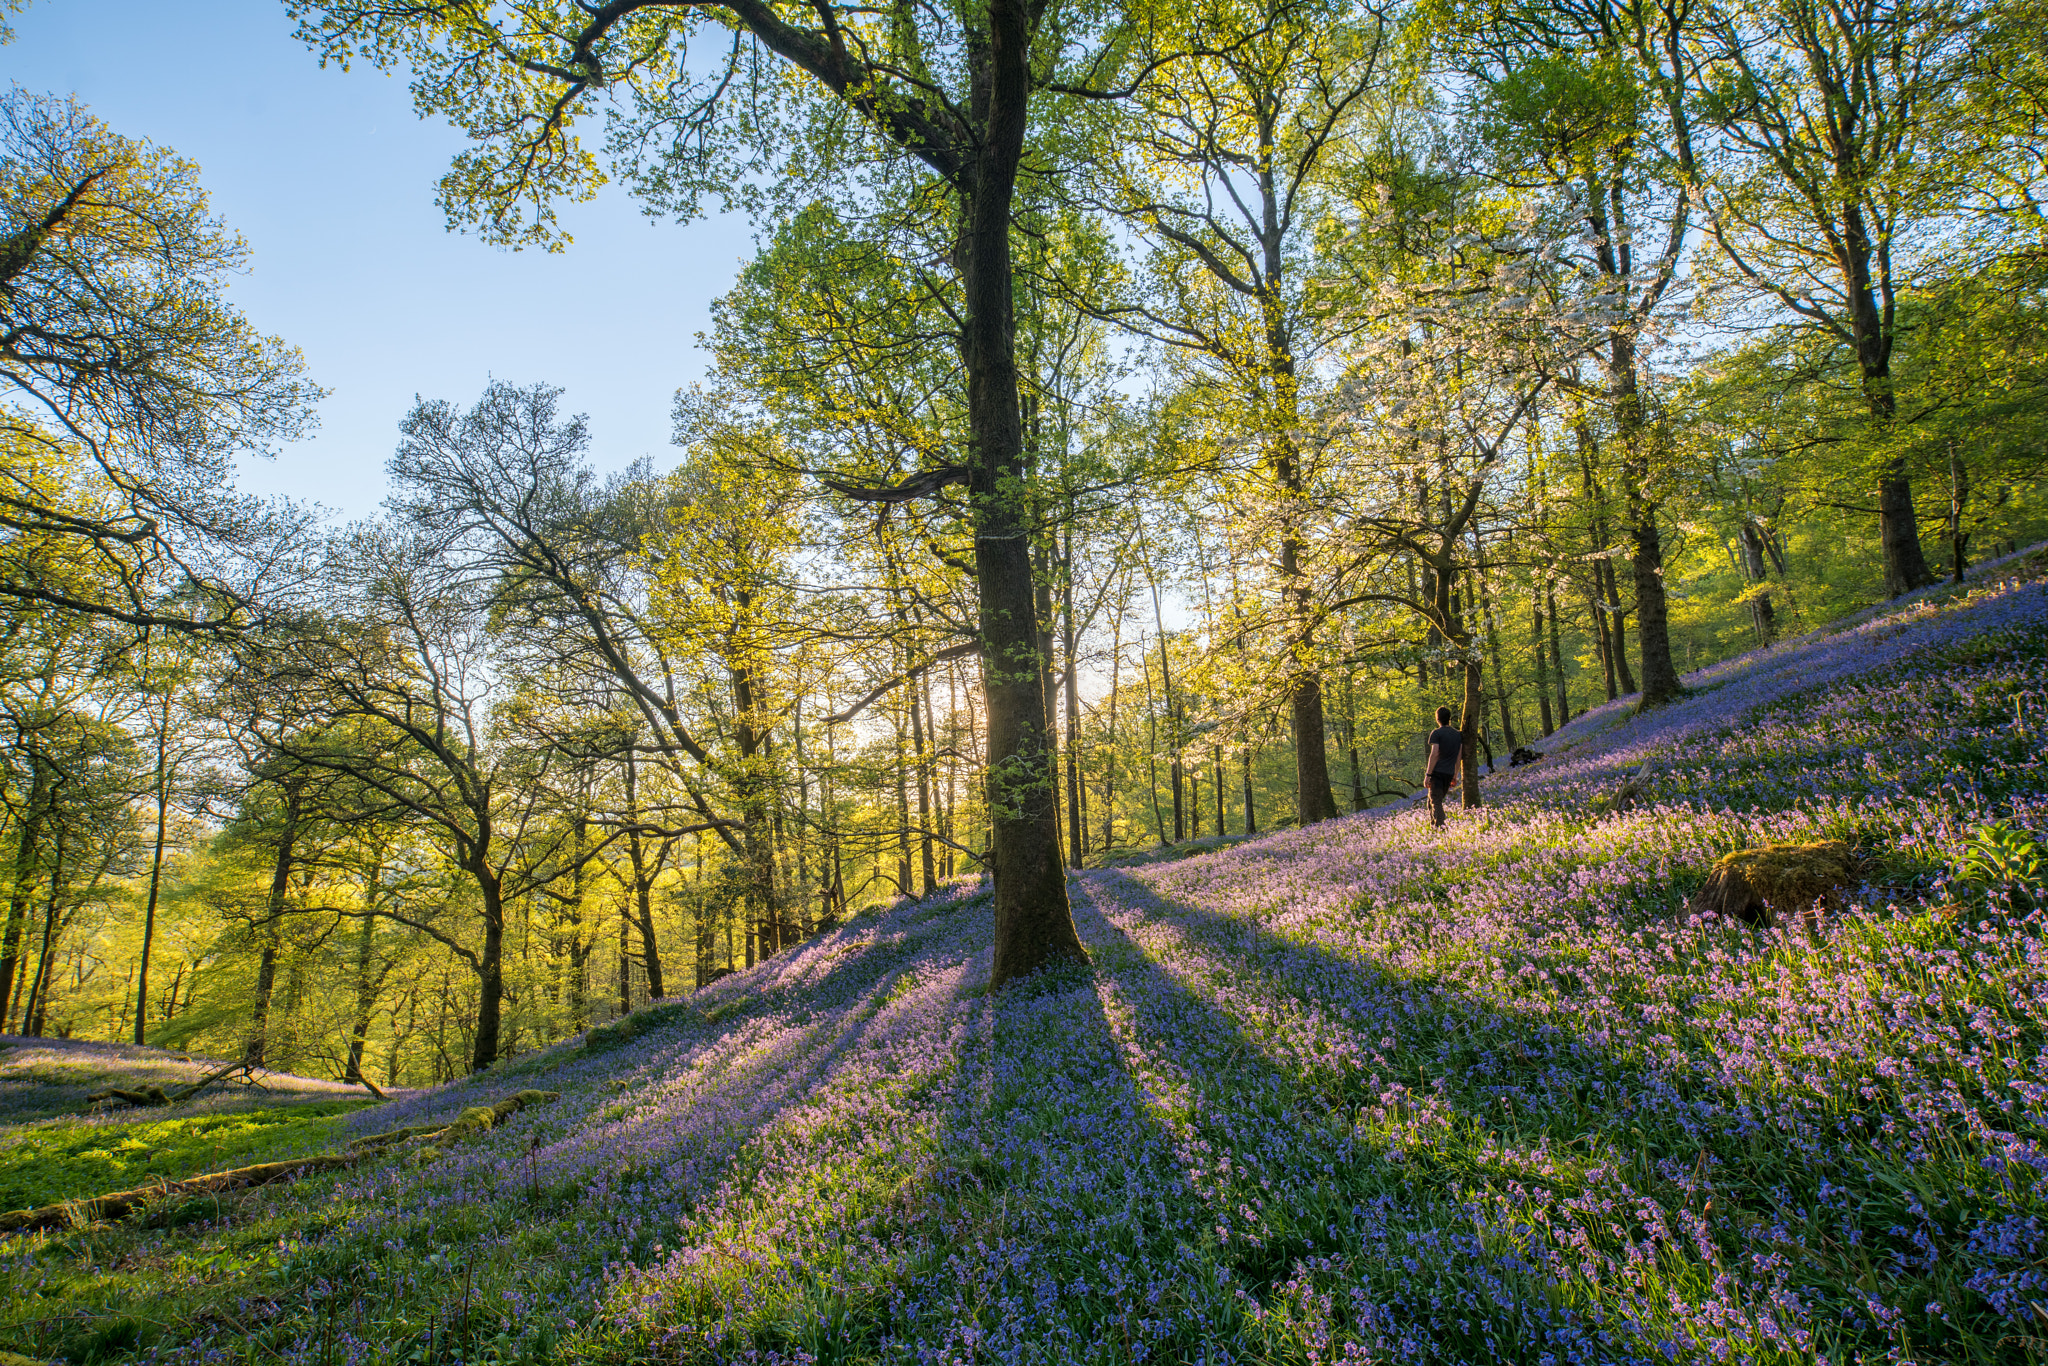 Sony a7R II + Tamron 18-270mm F3.5-6.3 Di II PZD sample photo. Evening light shining through the bluebells photography